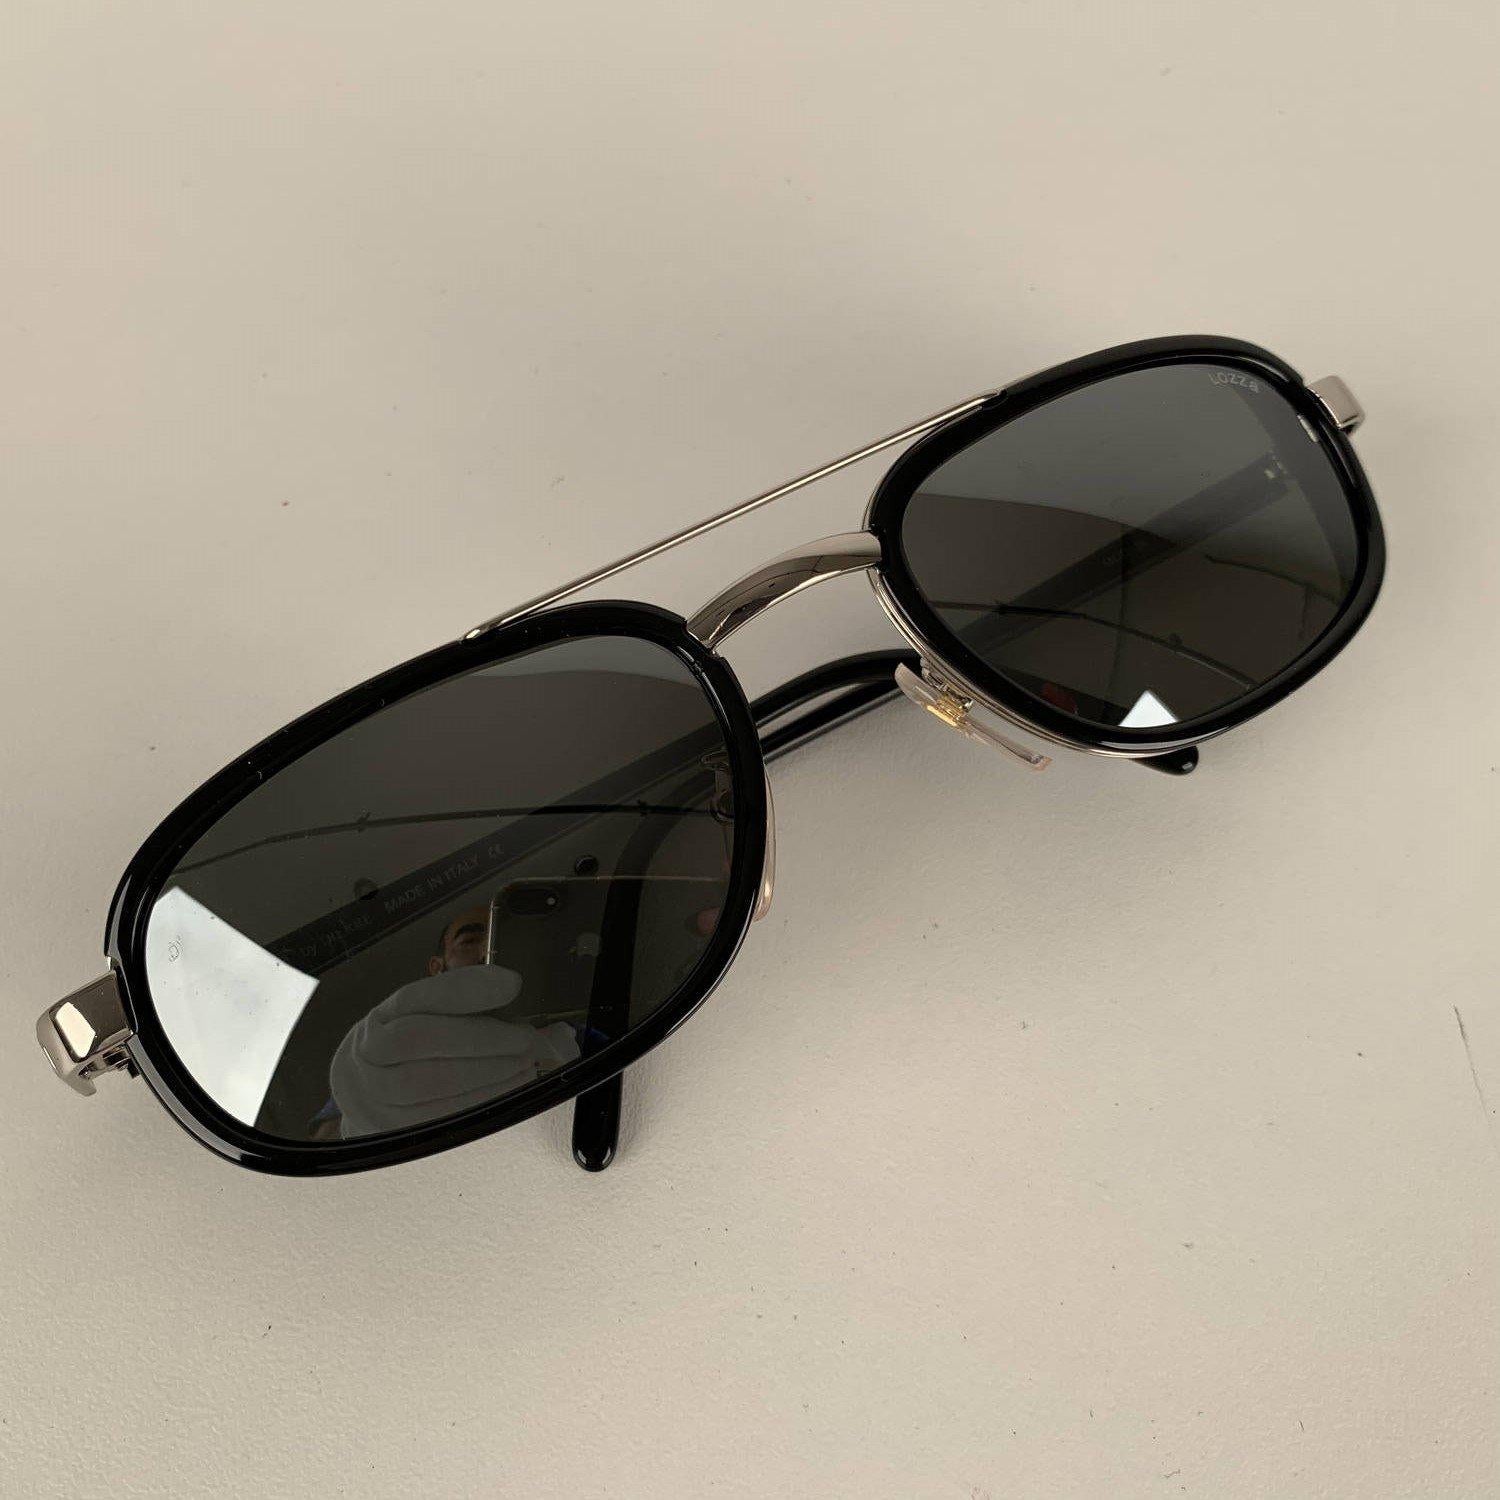 MATERIAL: Acetate COLOR: Black MODEL: Rectangular GENDER: Men SIZE: Medium COUNTRY OF MANUFACTURE: Italy Condition CONDITION DETAILS: NOS - New Old Vintage Stock - Mint Condition, never worn or used - They will come with a GENERIC CASE. Measurements